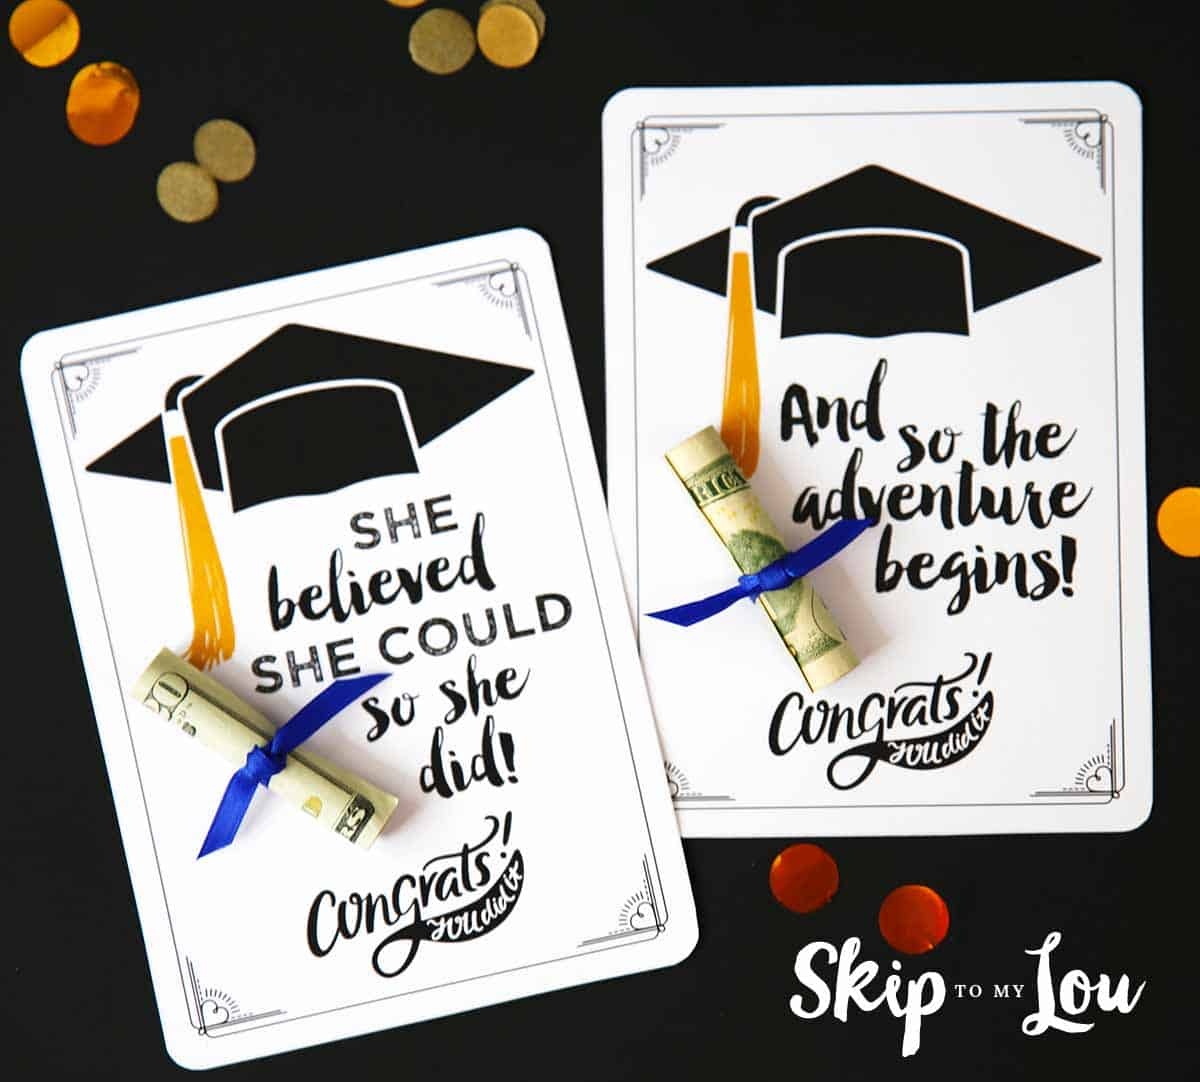 Free Graduation Cards With Positive Quotes And Cash! - Free Printable Graduation Cards